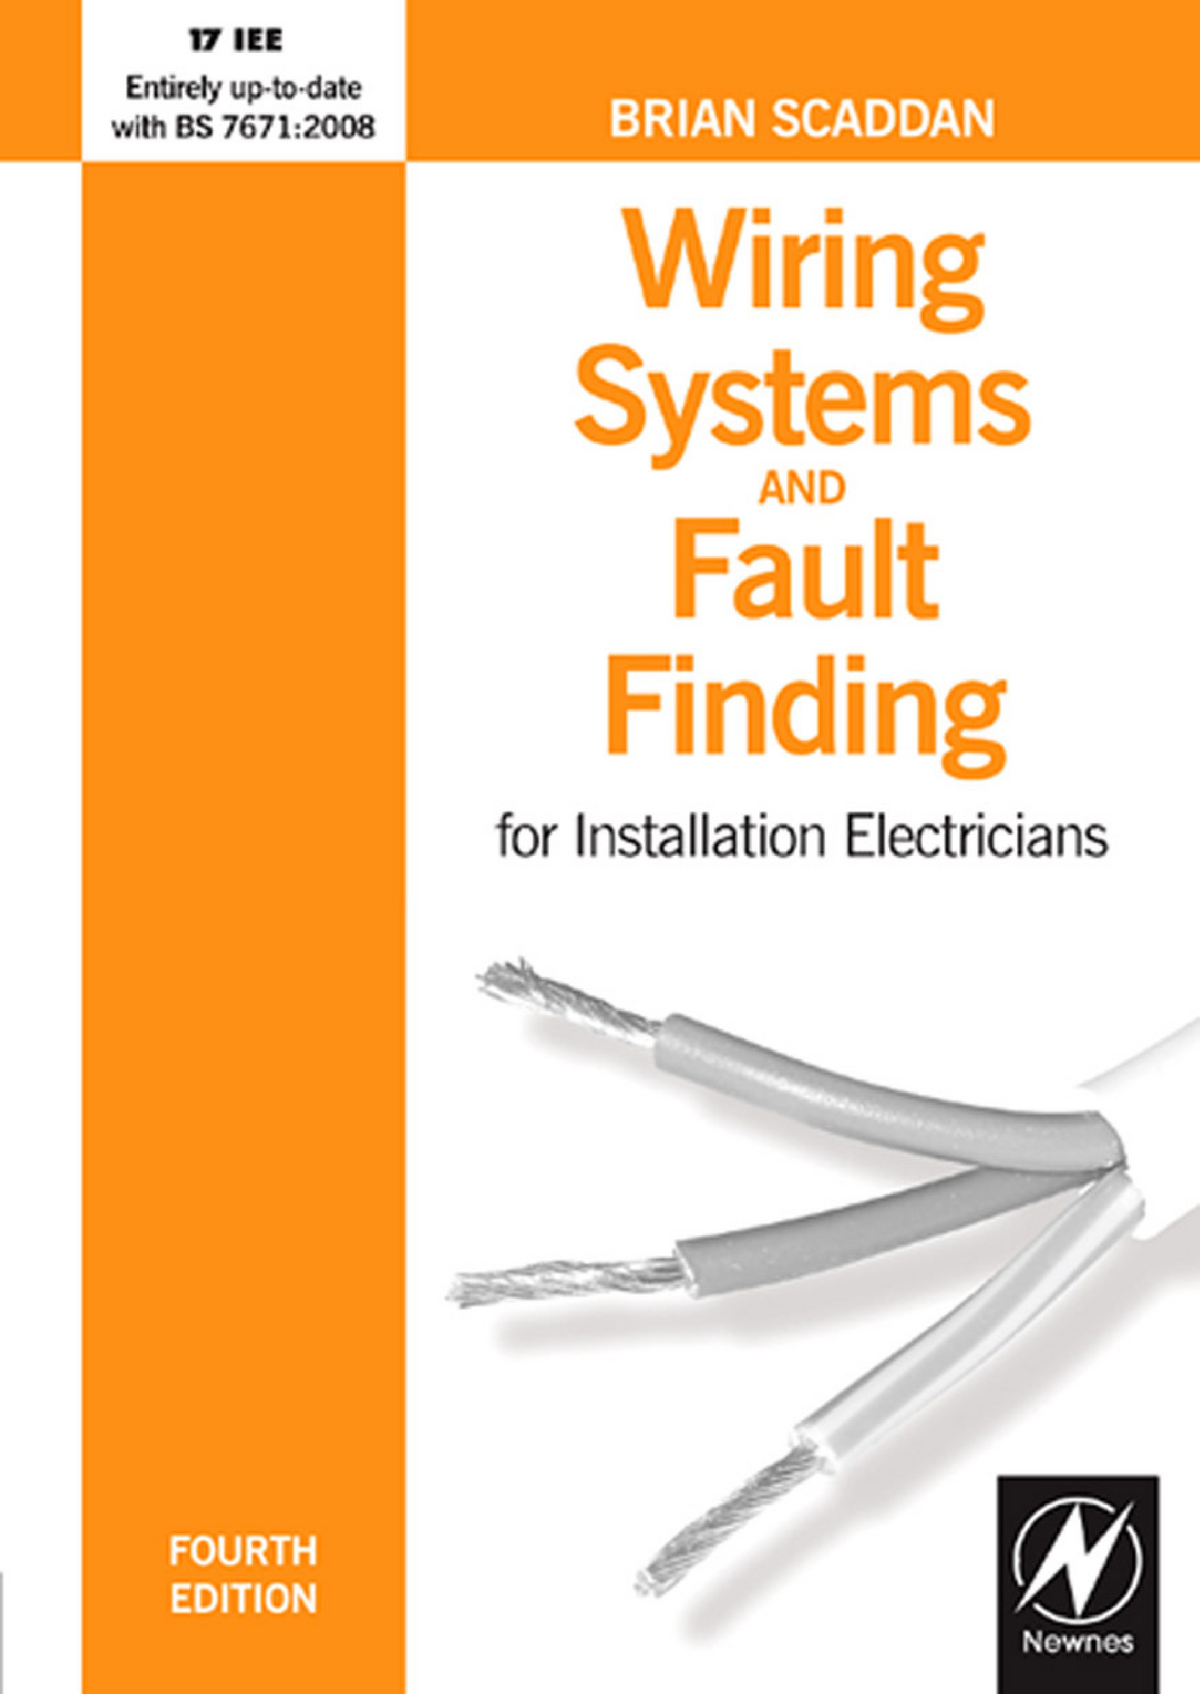 17th Edition IEE Wiring Regulations Design and Verification of ...